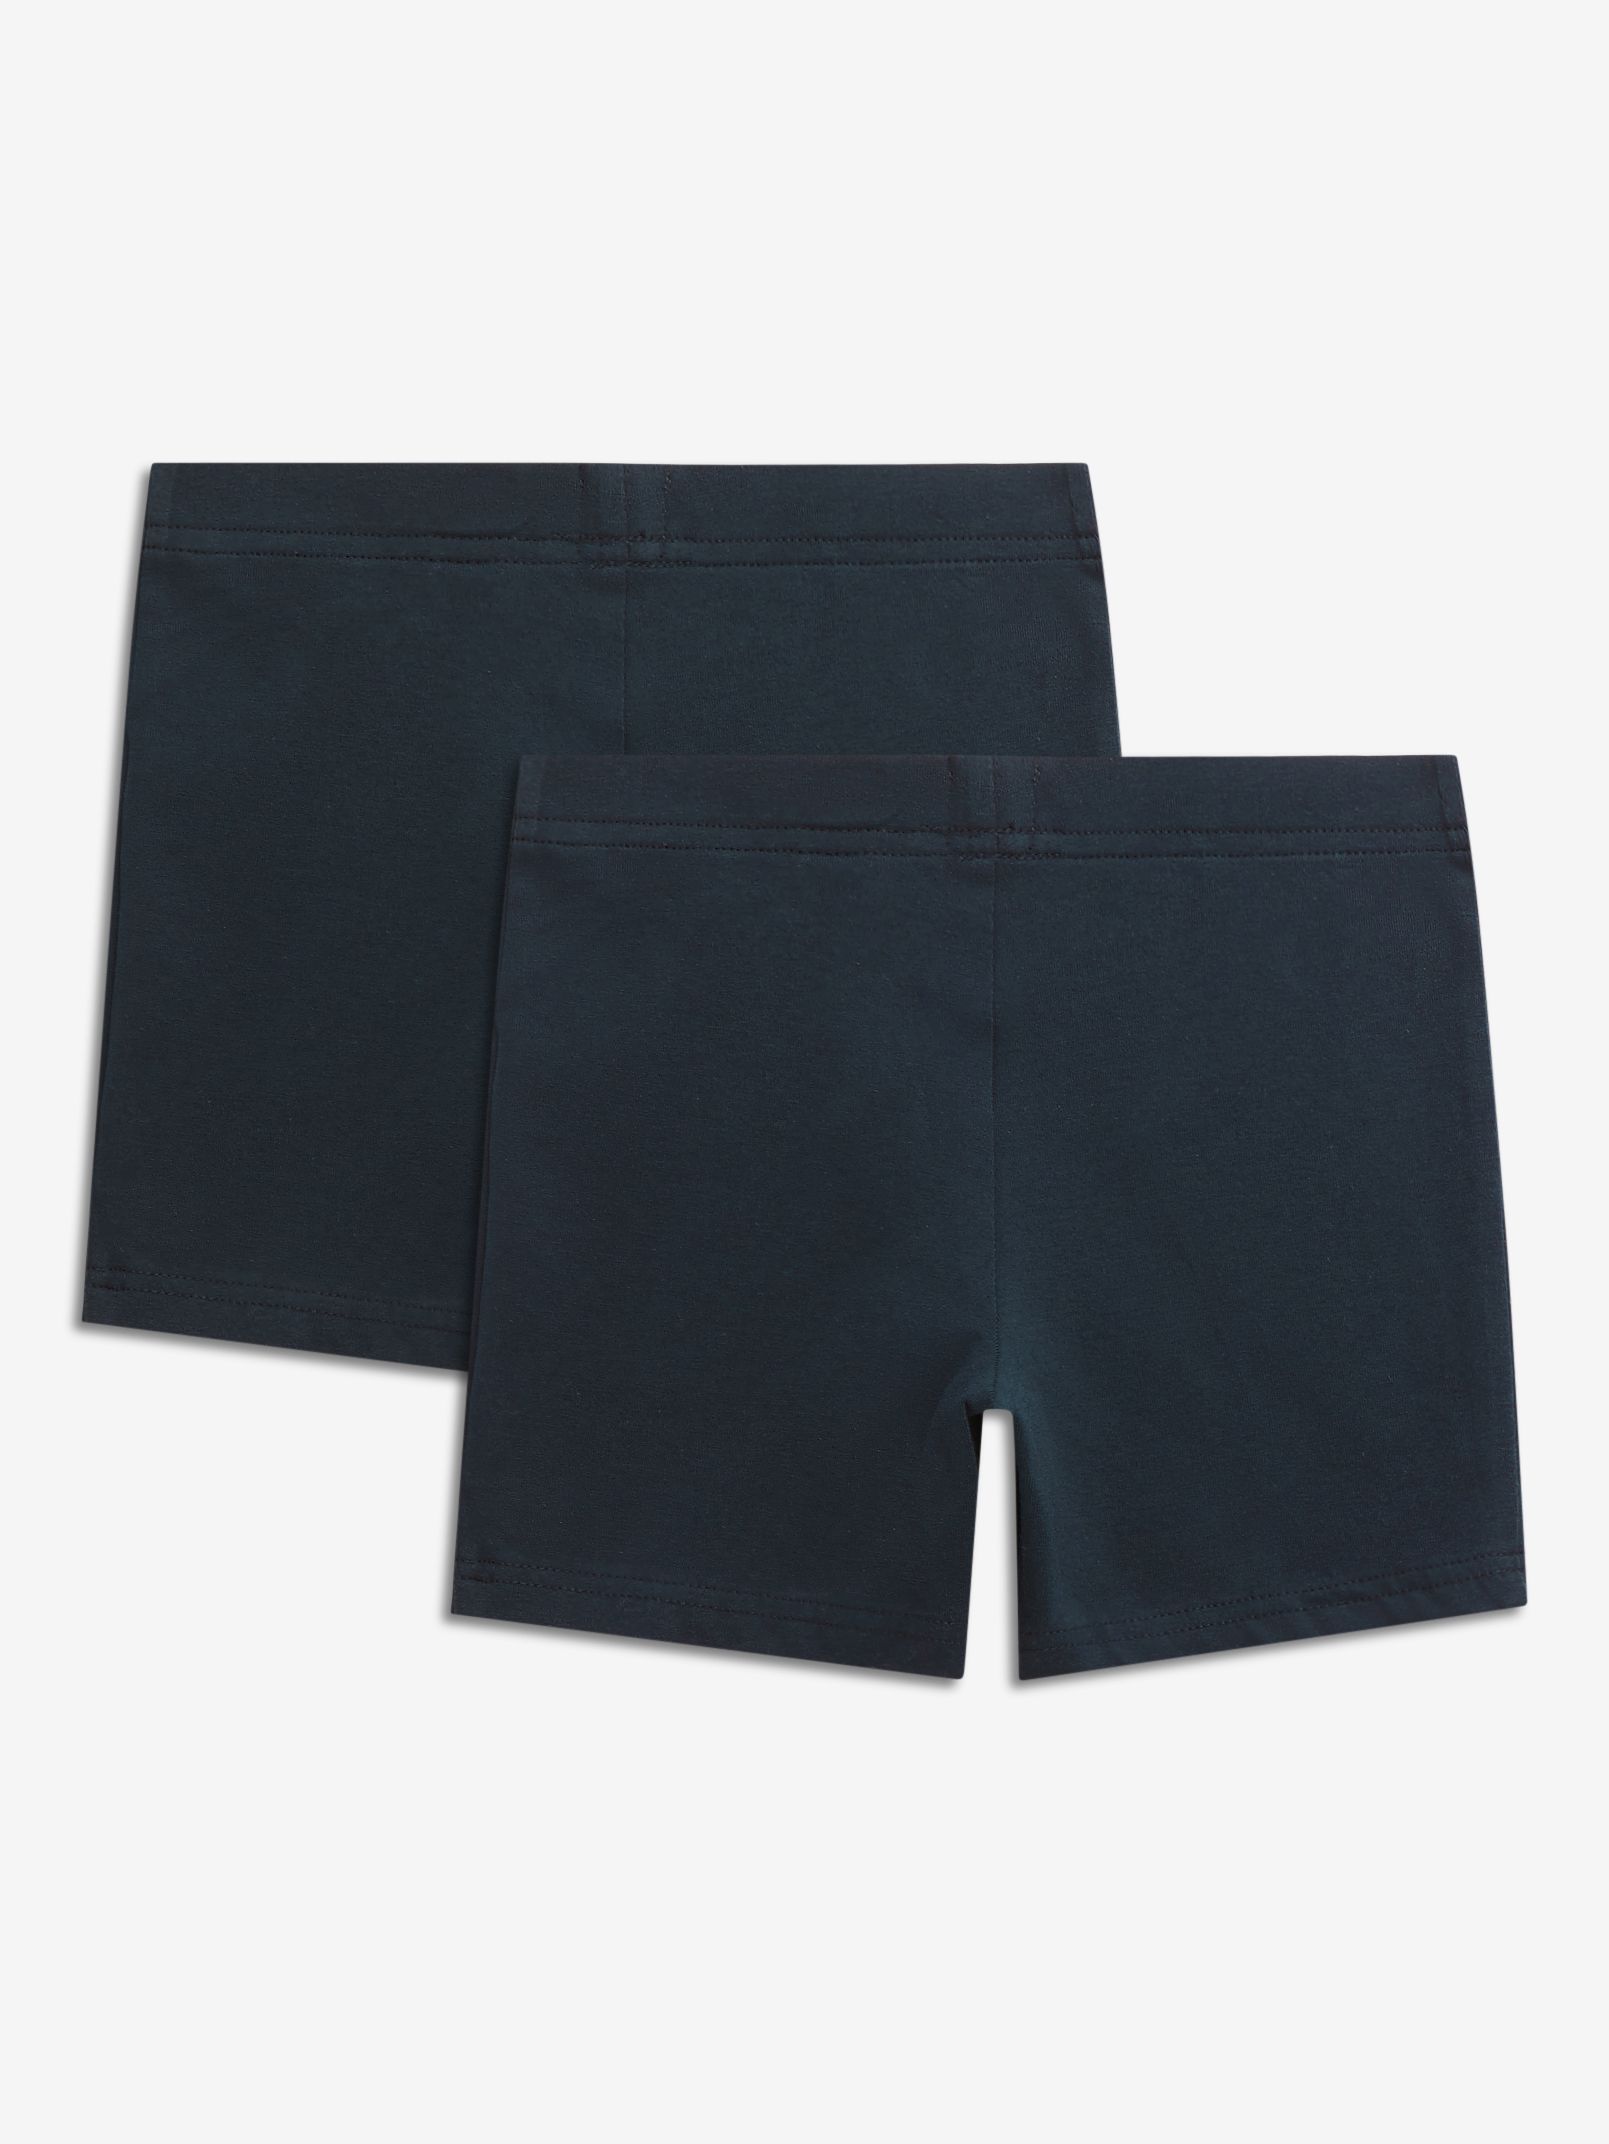 Buy John Lewis ANYDAY School Cycle Shorts, Pack of 2 Online at johnlewis.com